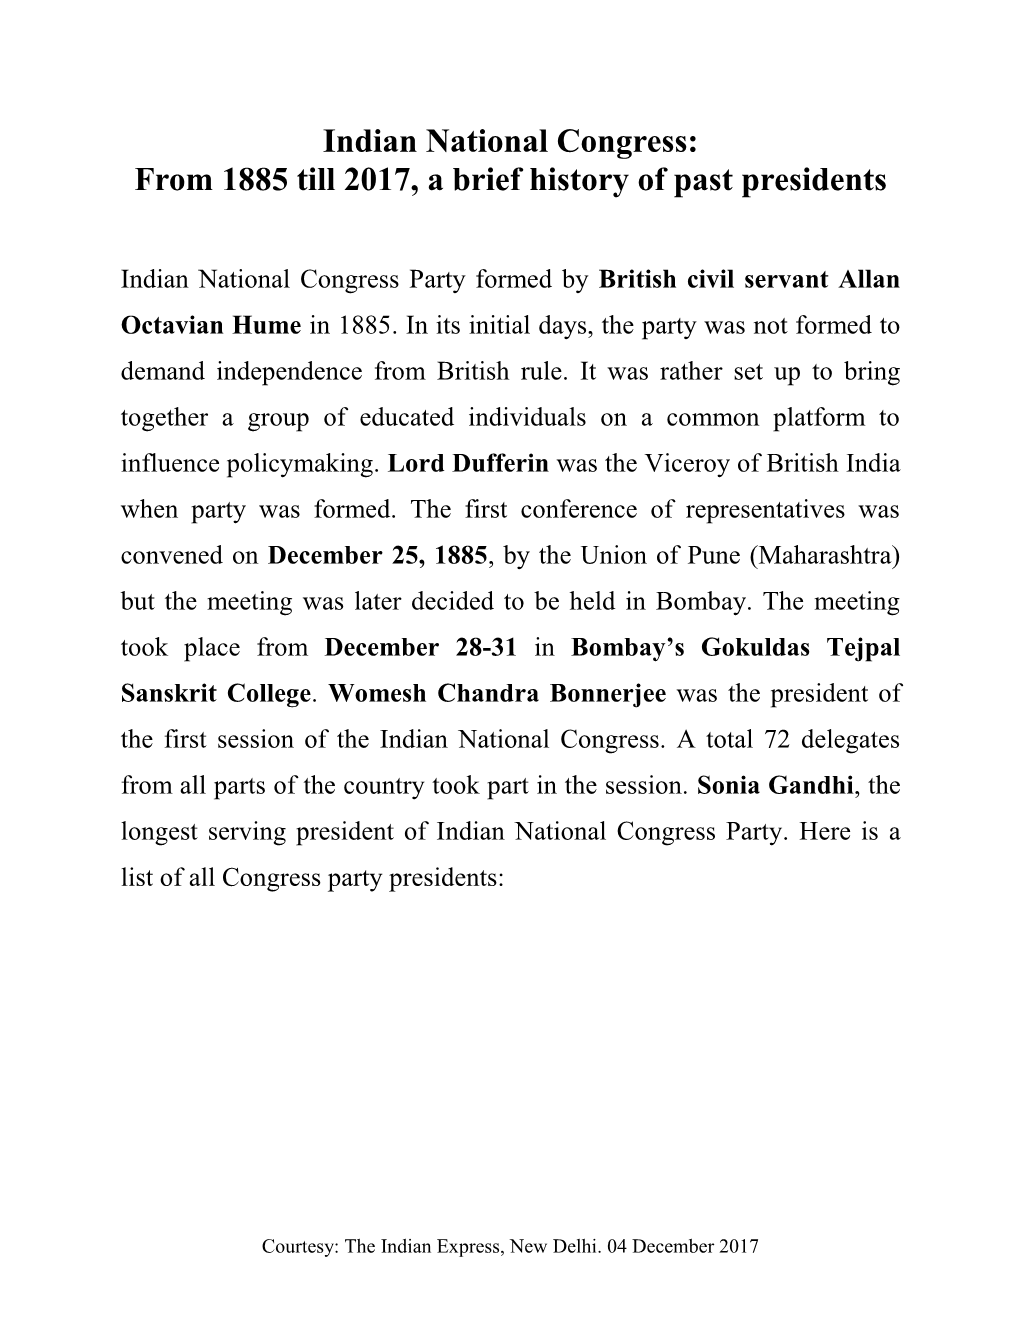 Indian National Congress: from 1885 Till 2017, a Brief History of Past Presidents